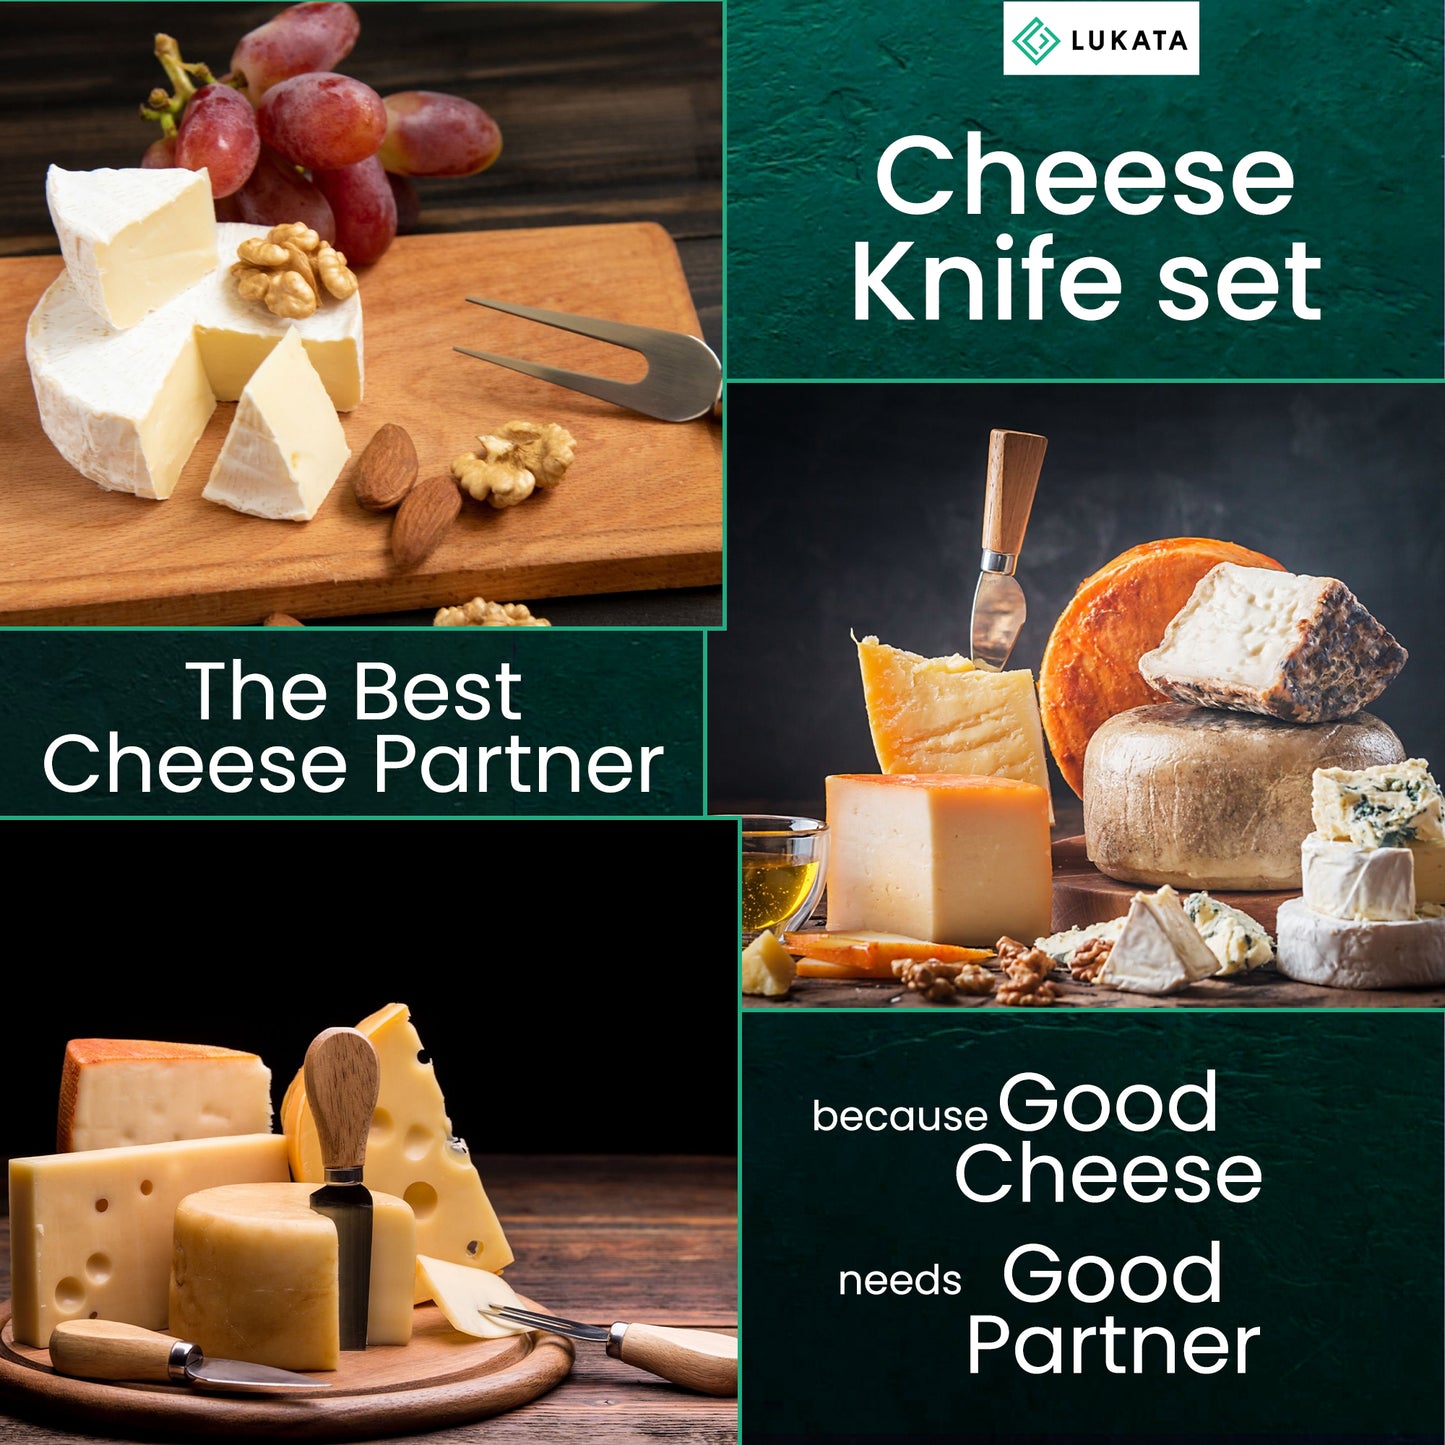 the best cheese partner - cheese knifes